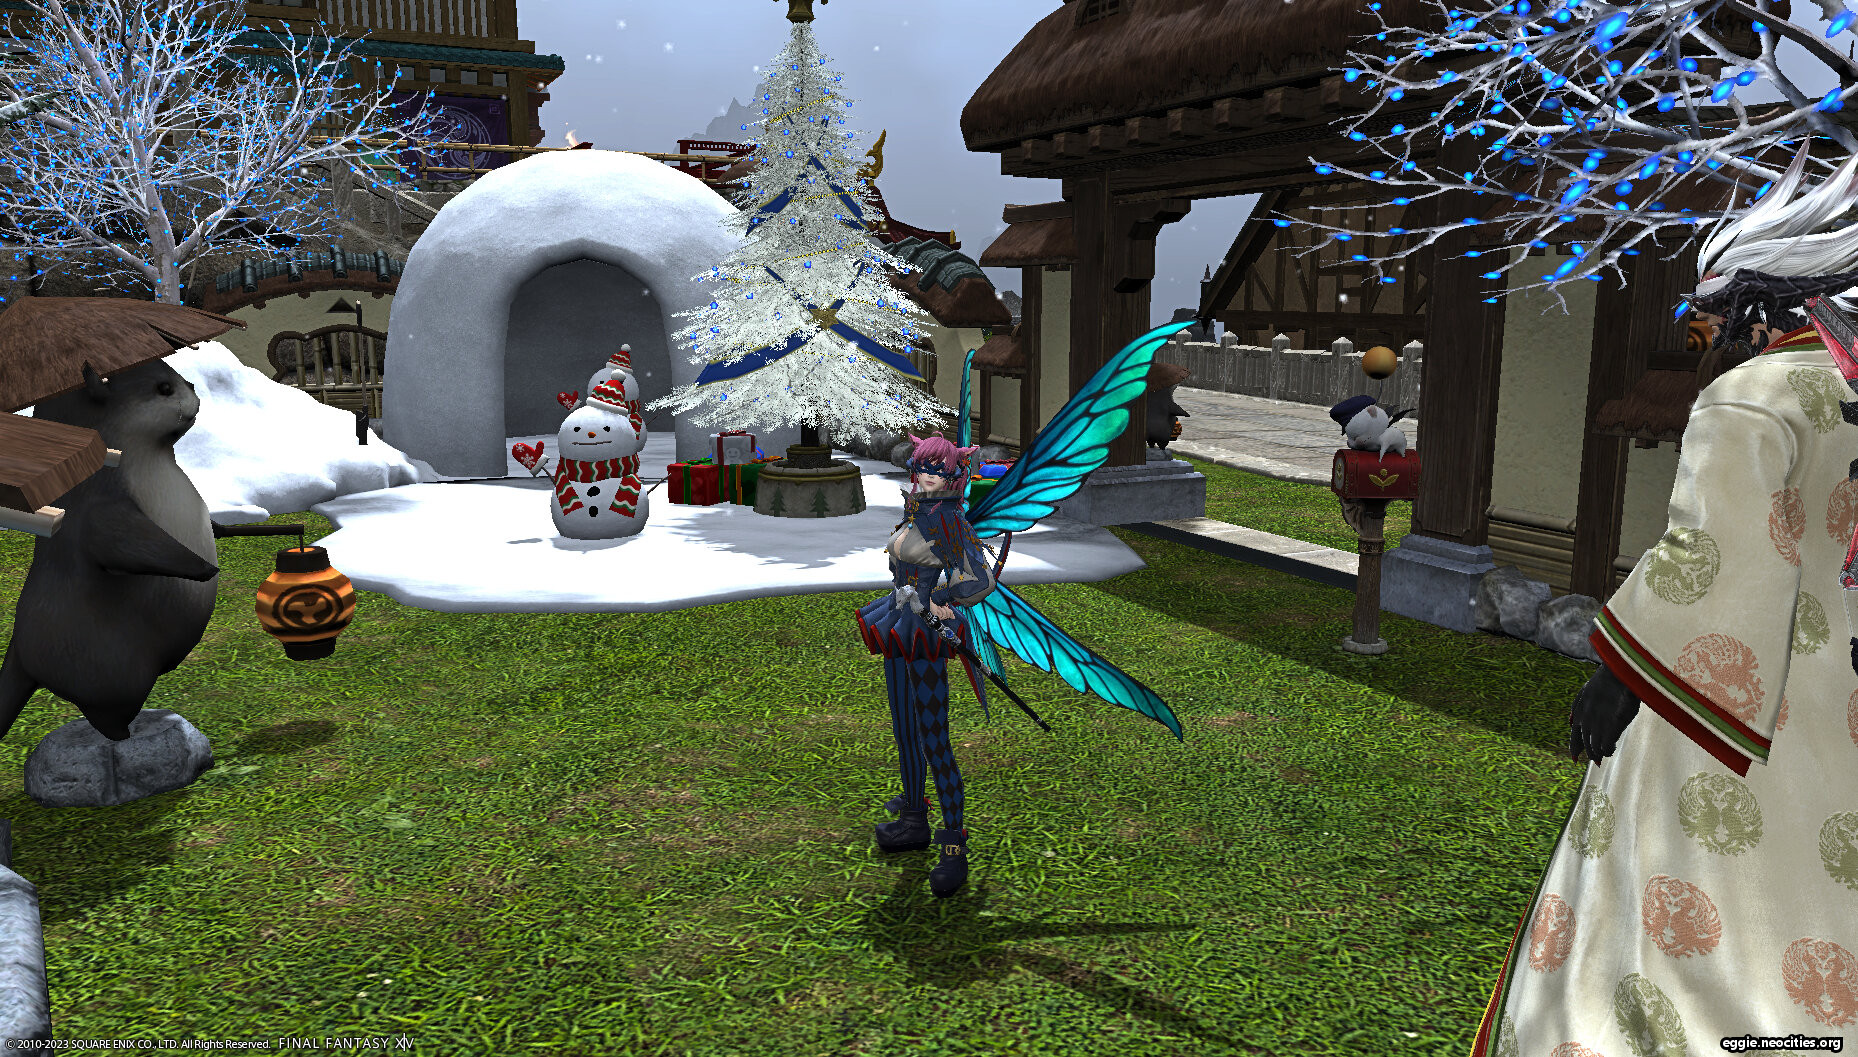 Zel posing with her Blue mage outfit consisting of the Wyvernskin Mask of Casting, Evenstar Coat, Valentiones tights, and Valentiones Pattens. She also has blue pixie wings.